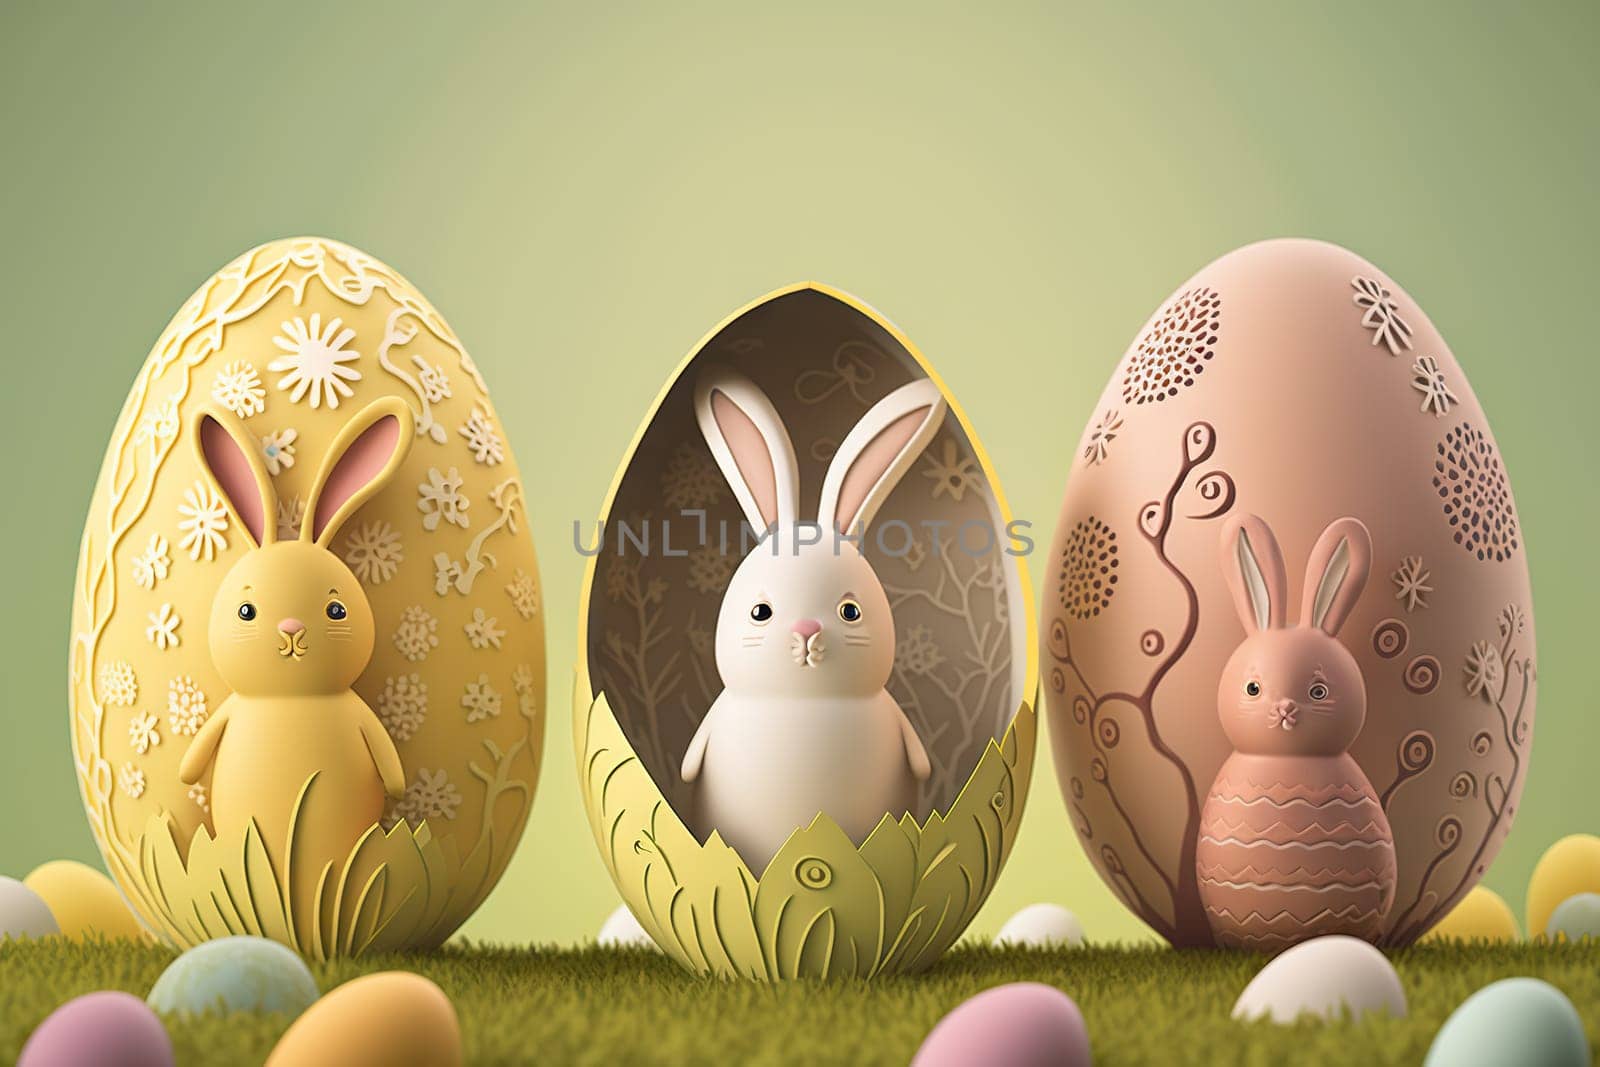 Easter Bunnies Hatching from Decorative Eggs by chrisroll